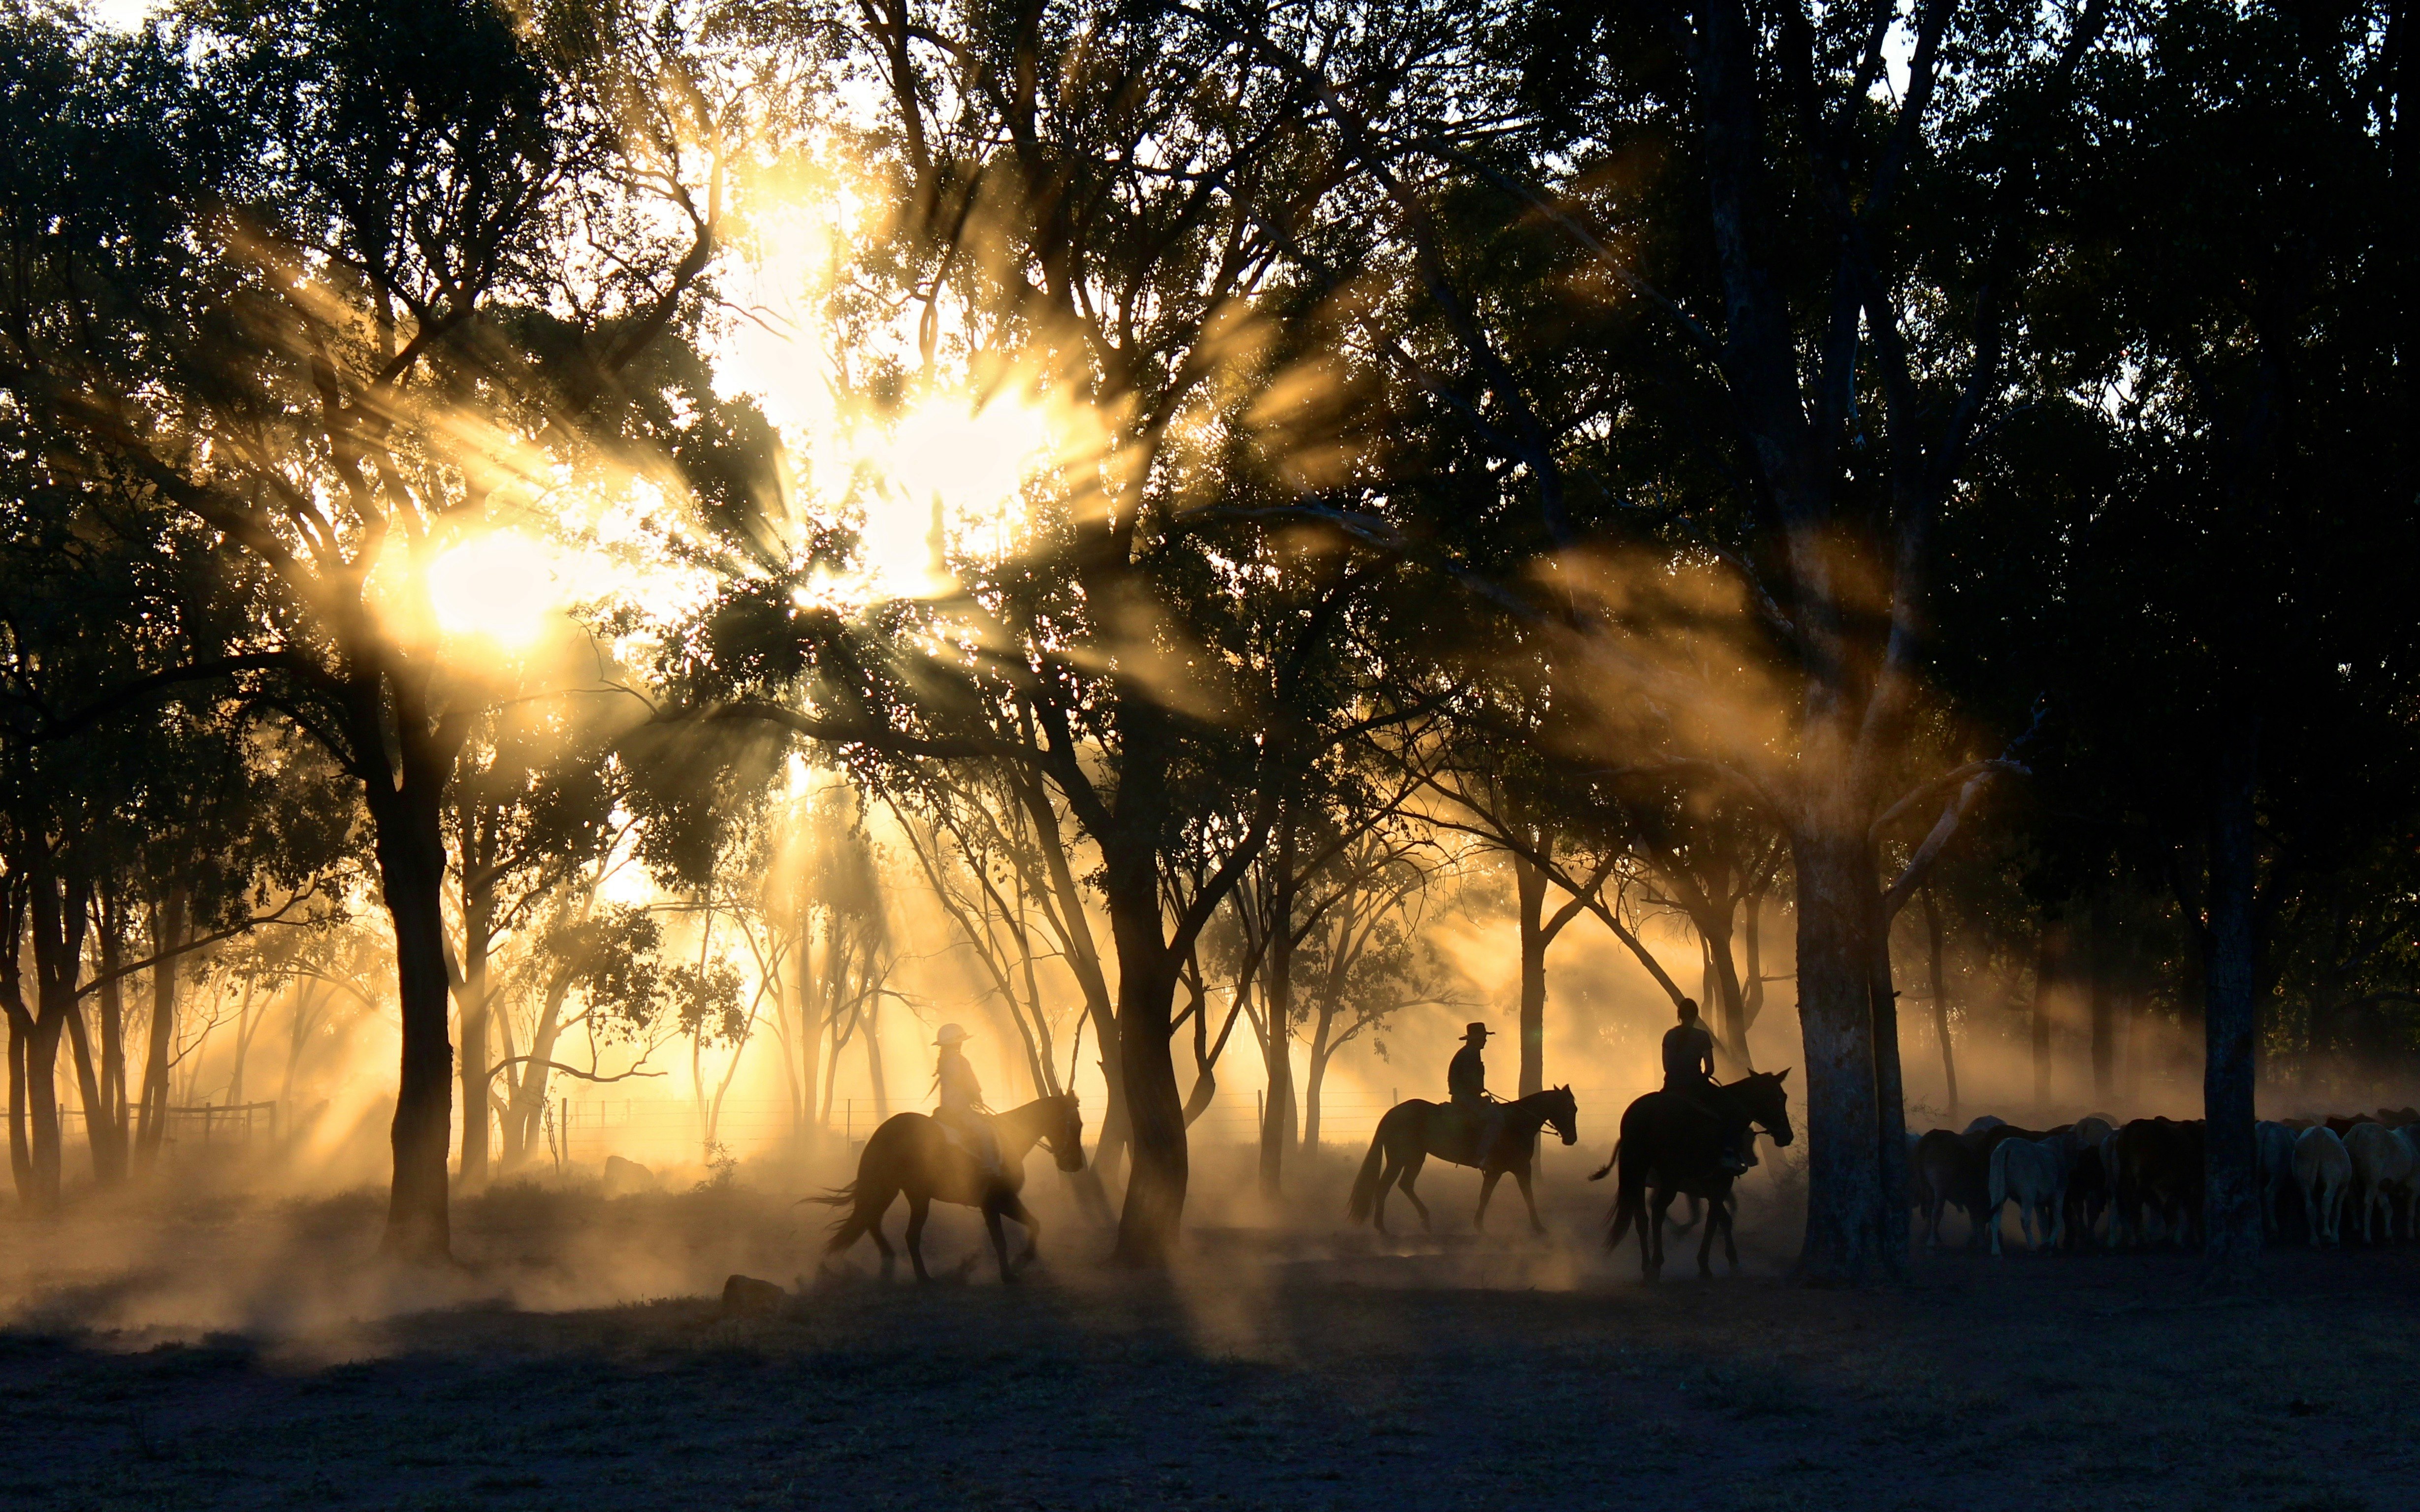 In 2013 I visited my relatives on Forrester Station in the Queensland outback for a week. One evening I helped drive a herd of young cattle back to their paddock. I noticed how amazing the golden sunset light looked through the dust clouds thrown up by the cattle. The next day I brought my camera along and managed to capture these incredible light conditions. To me that shot perfectly captures the earthy serenity I so love about the Australian outback, along with the warm and calm character of the people working that incredible landscape.